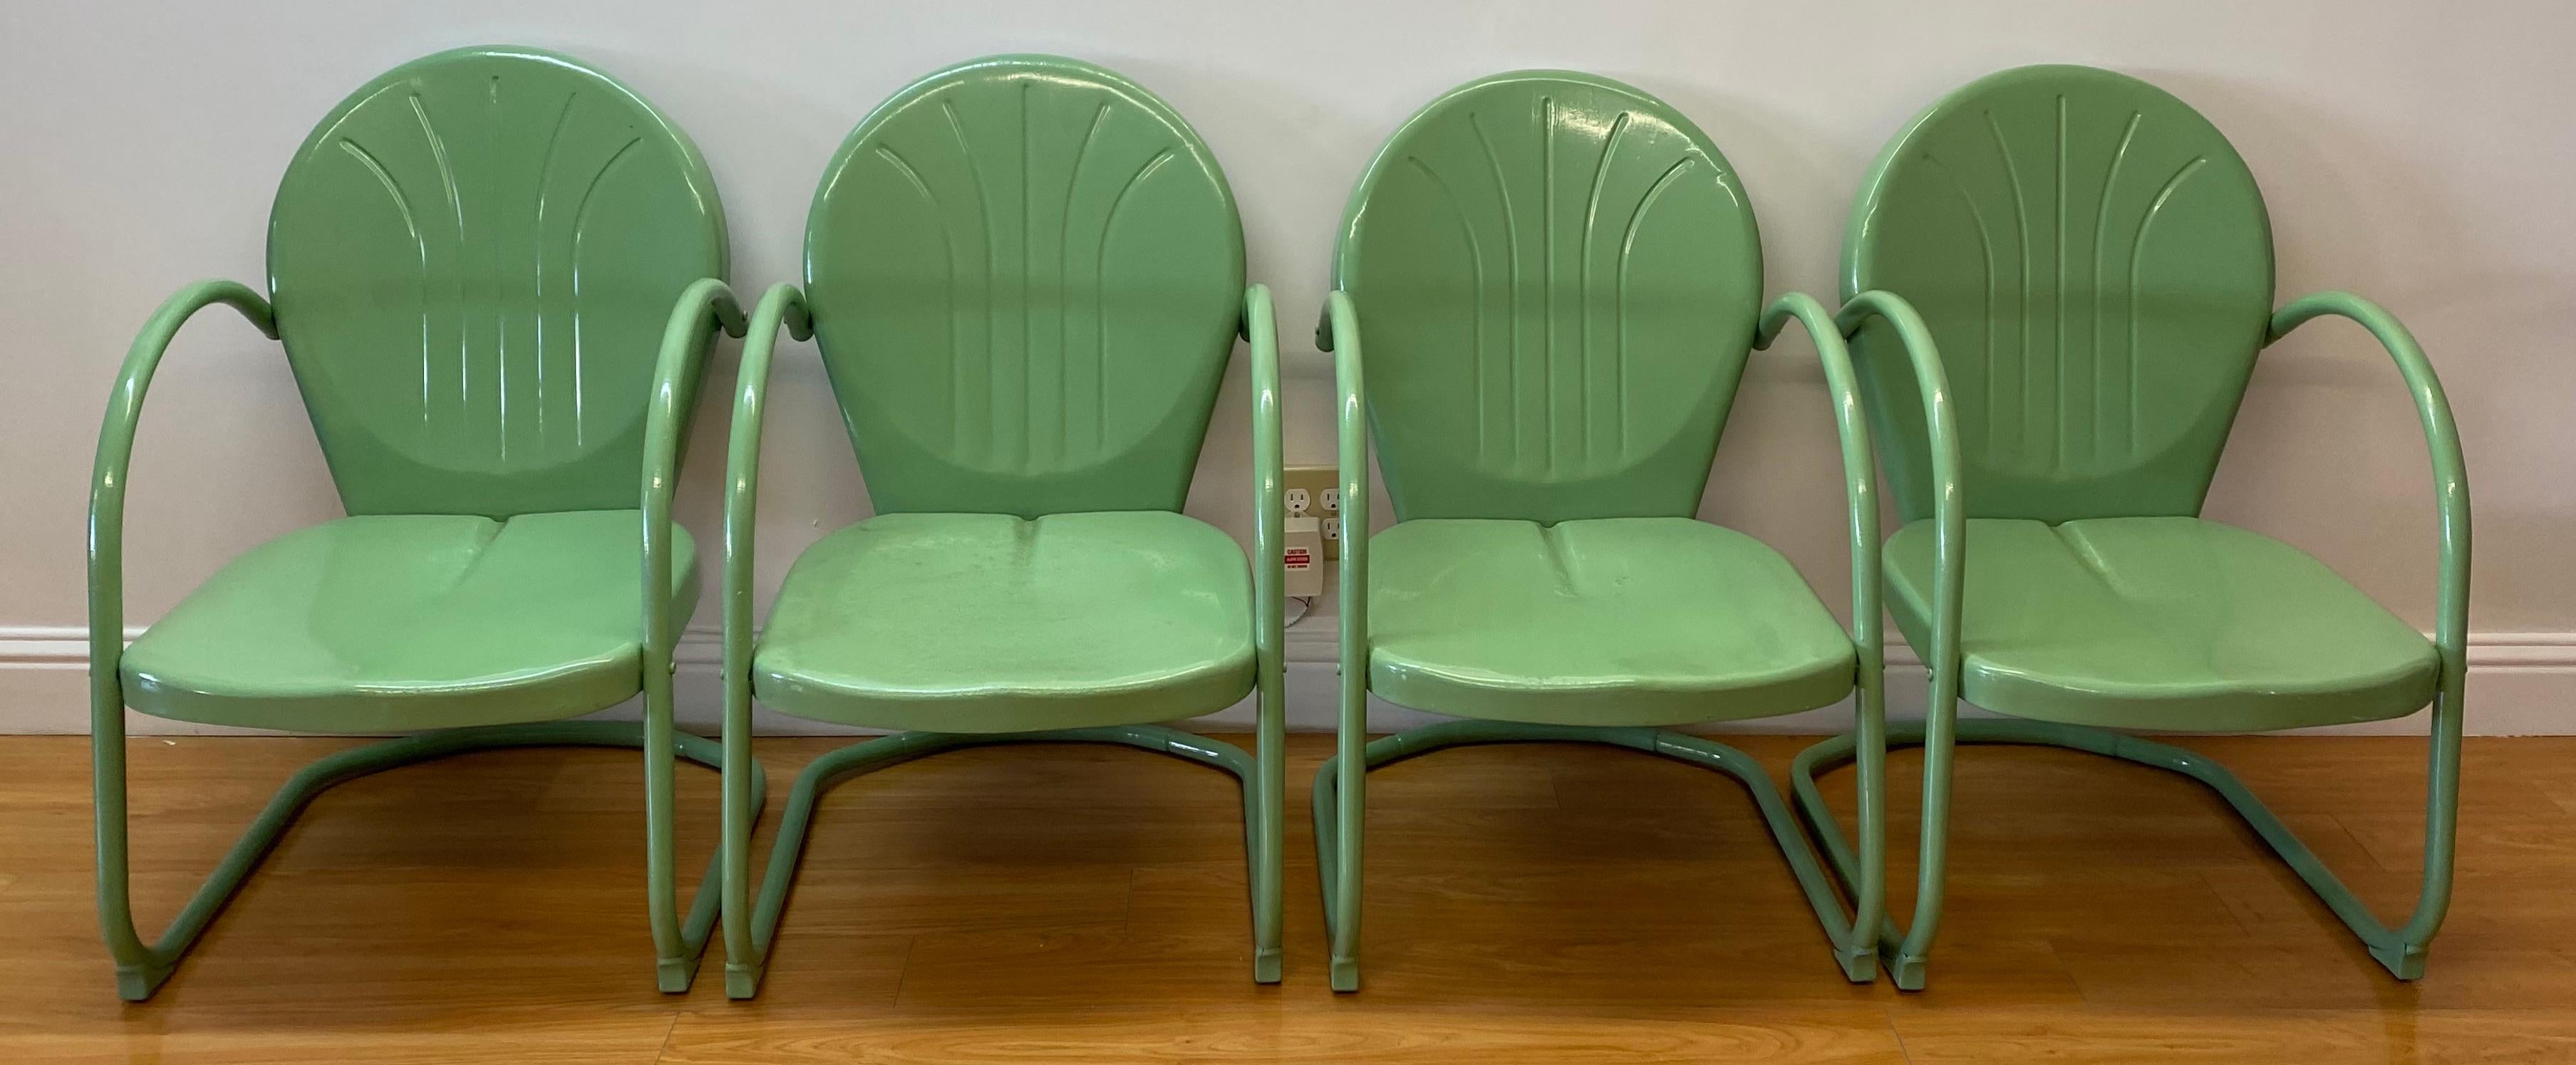 Hand-Crafted Set of Four Vintage Mint Green Enameled Metal Patio Garden Chairs, C.1940s